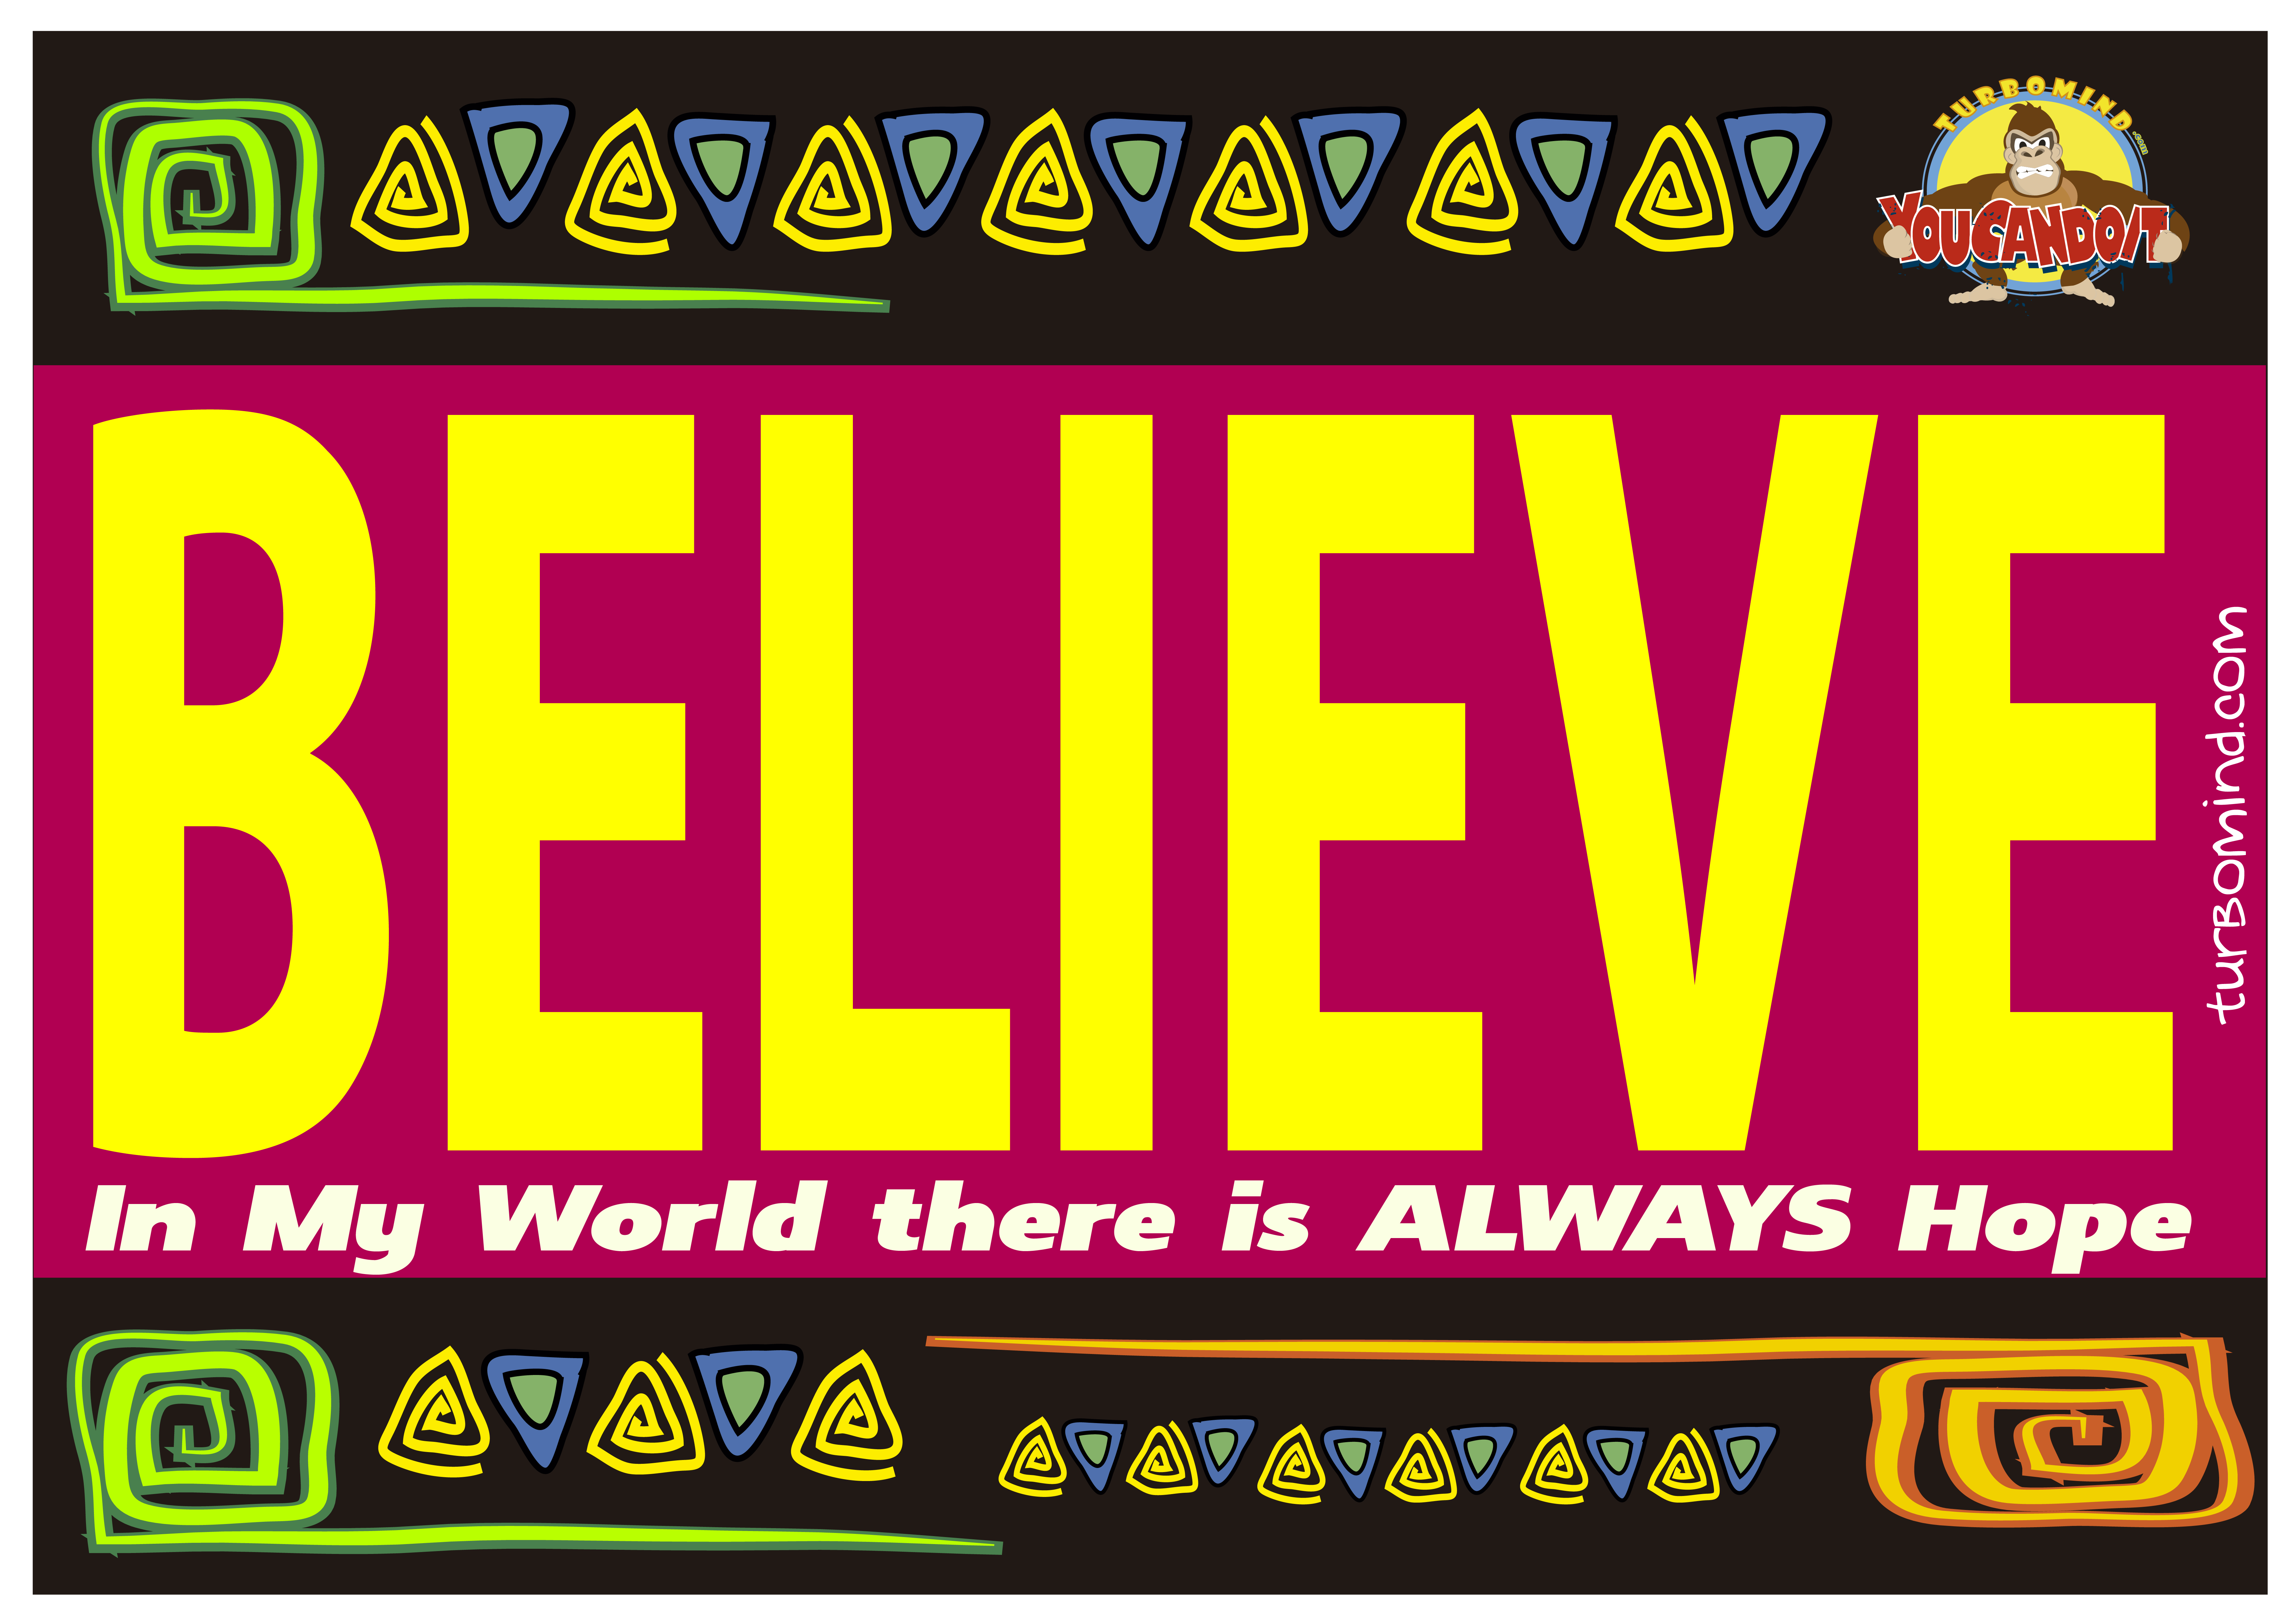 Believe. In My World there is Always HOPE.